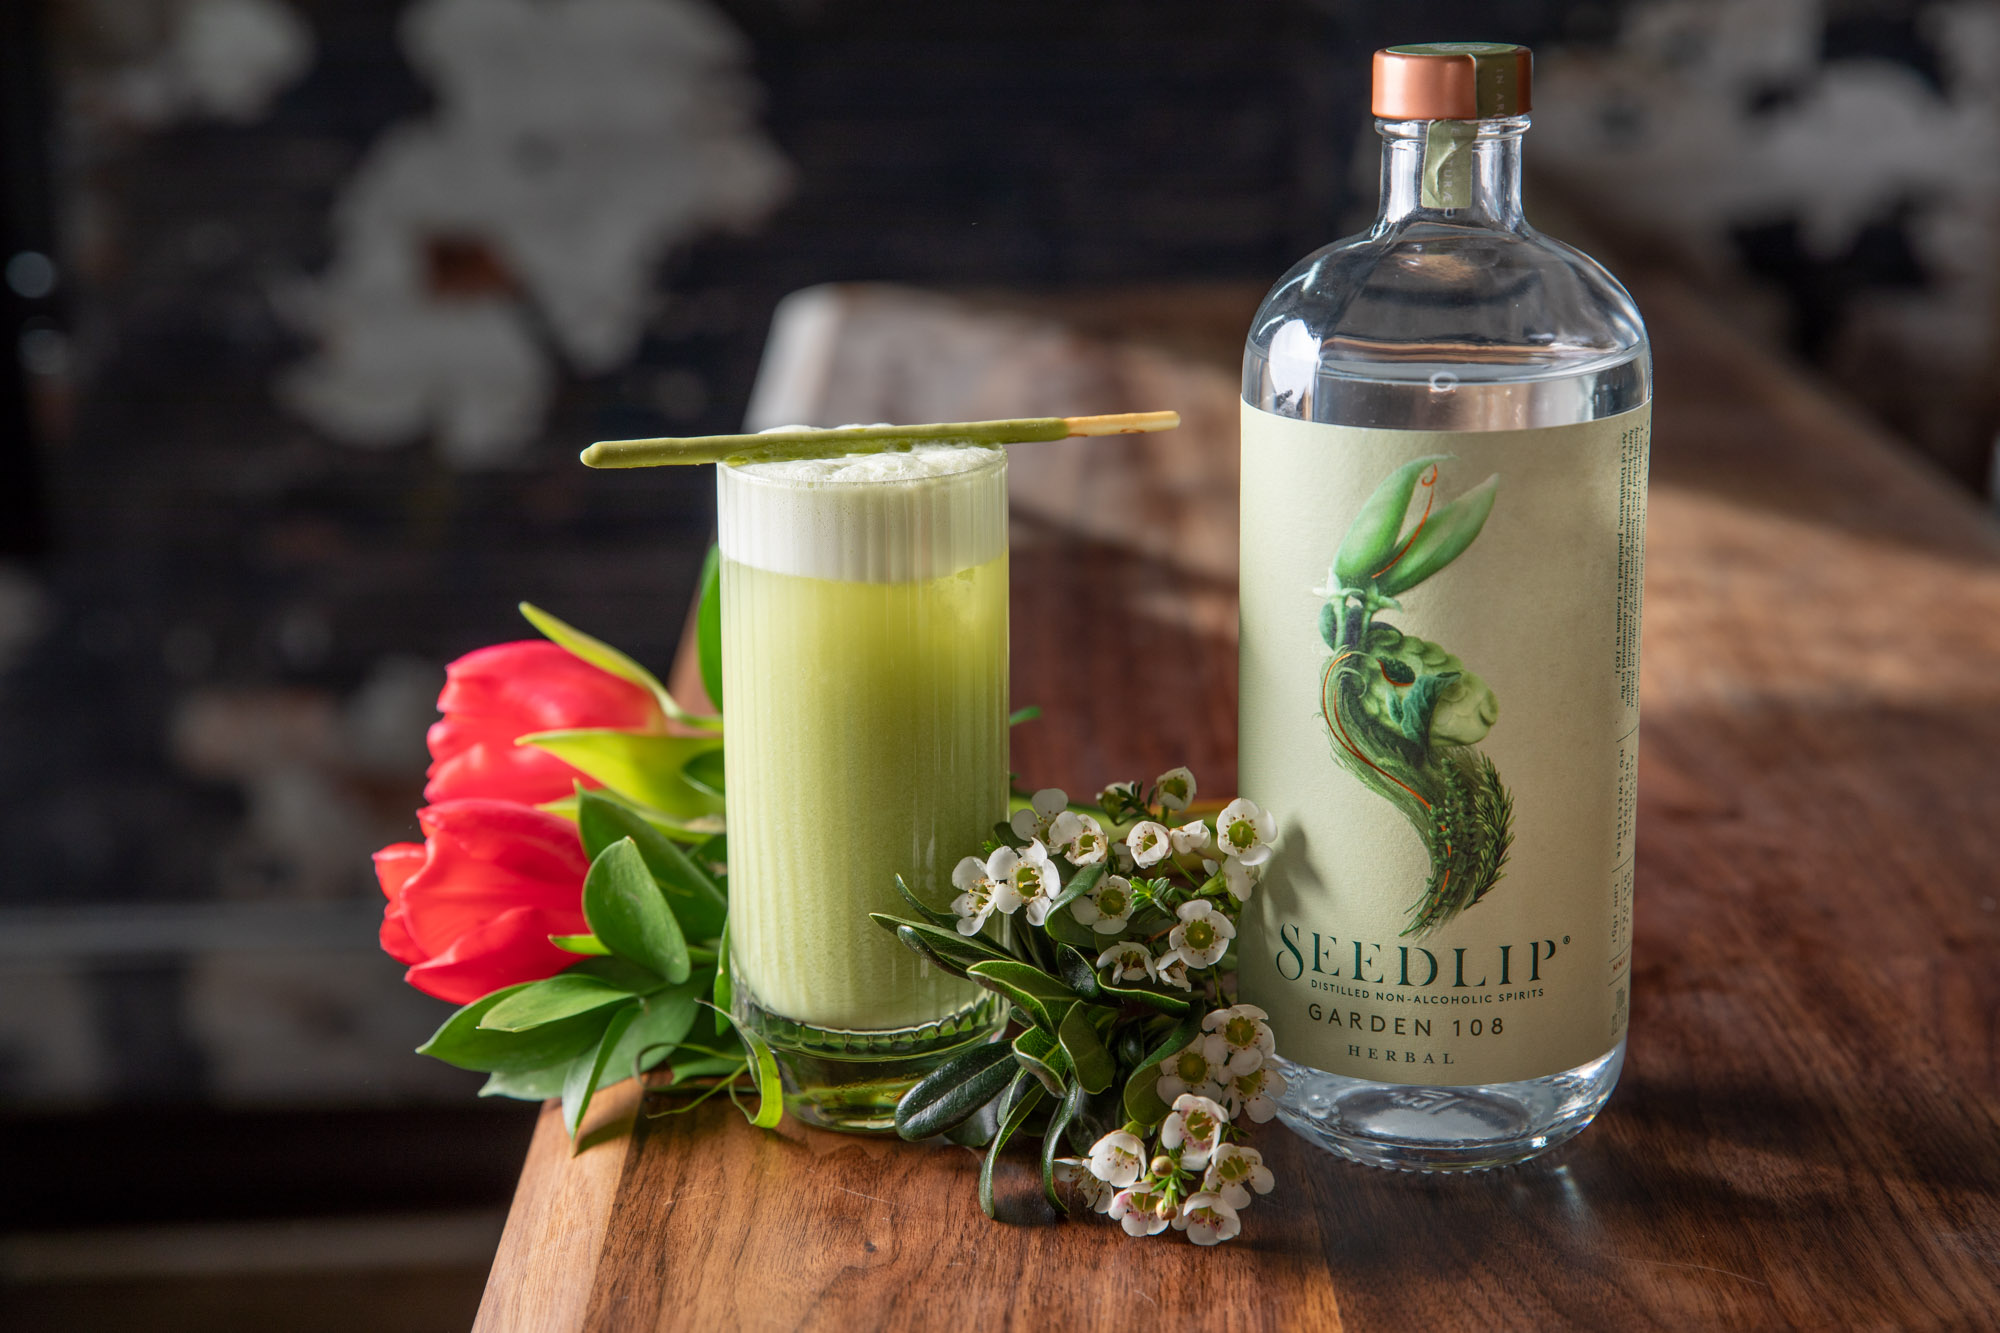 Cocktail photographed with flowers for Seedlip